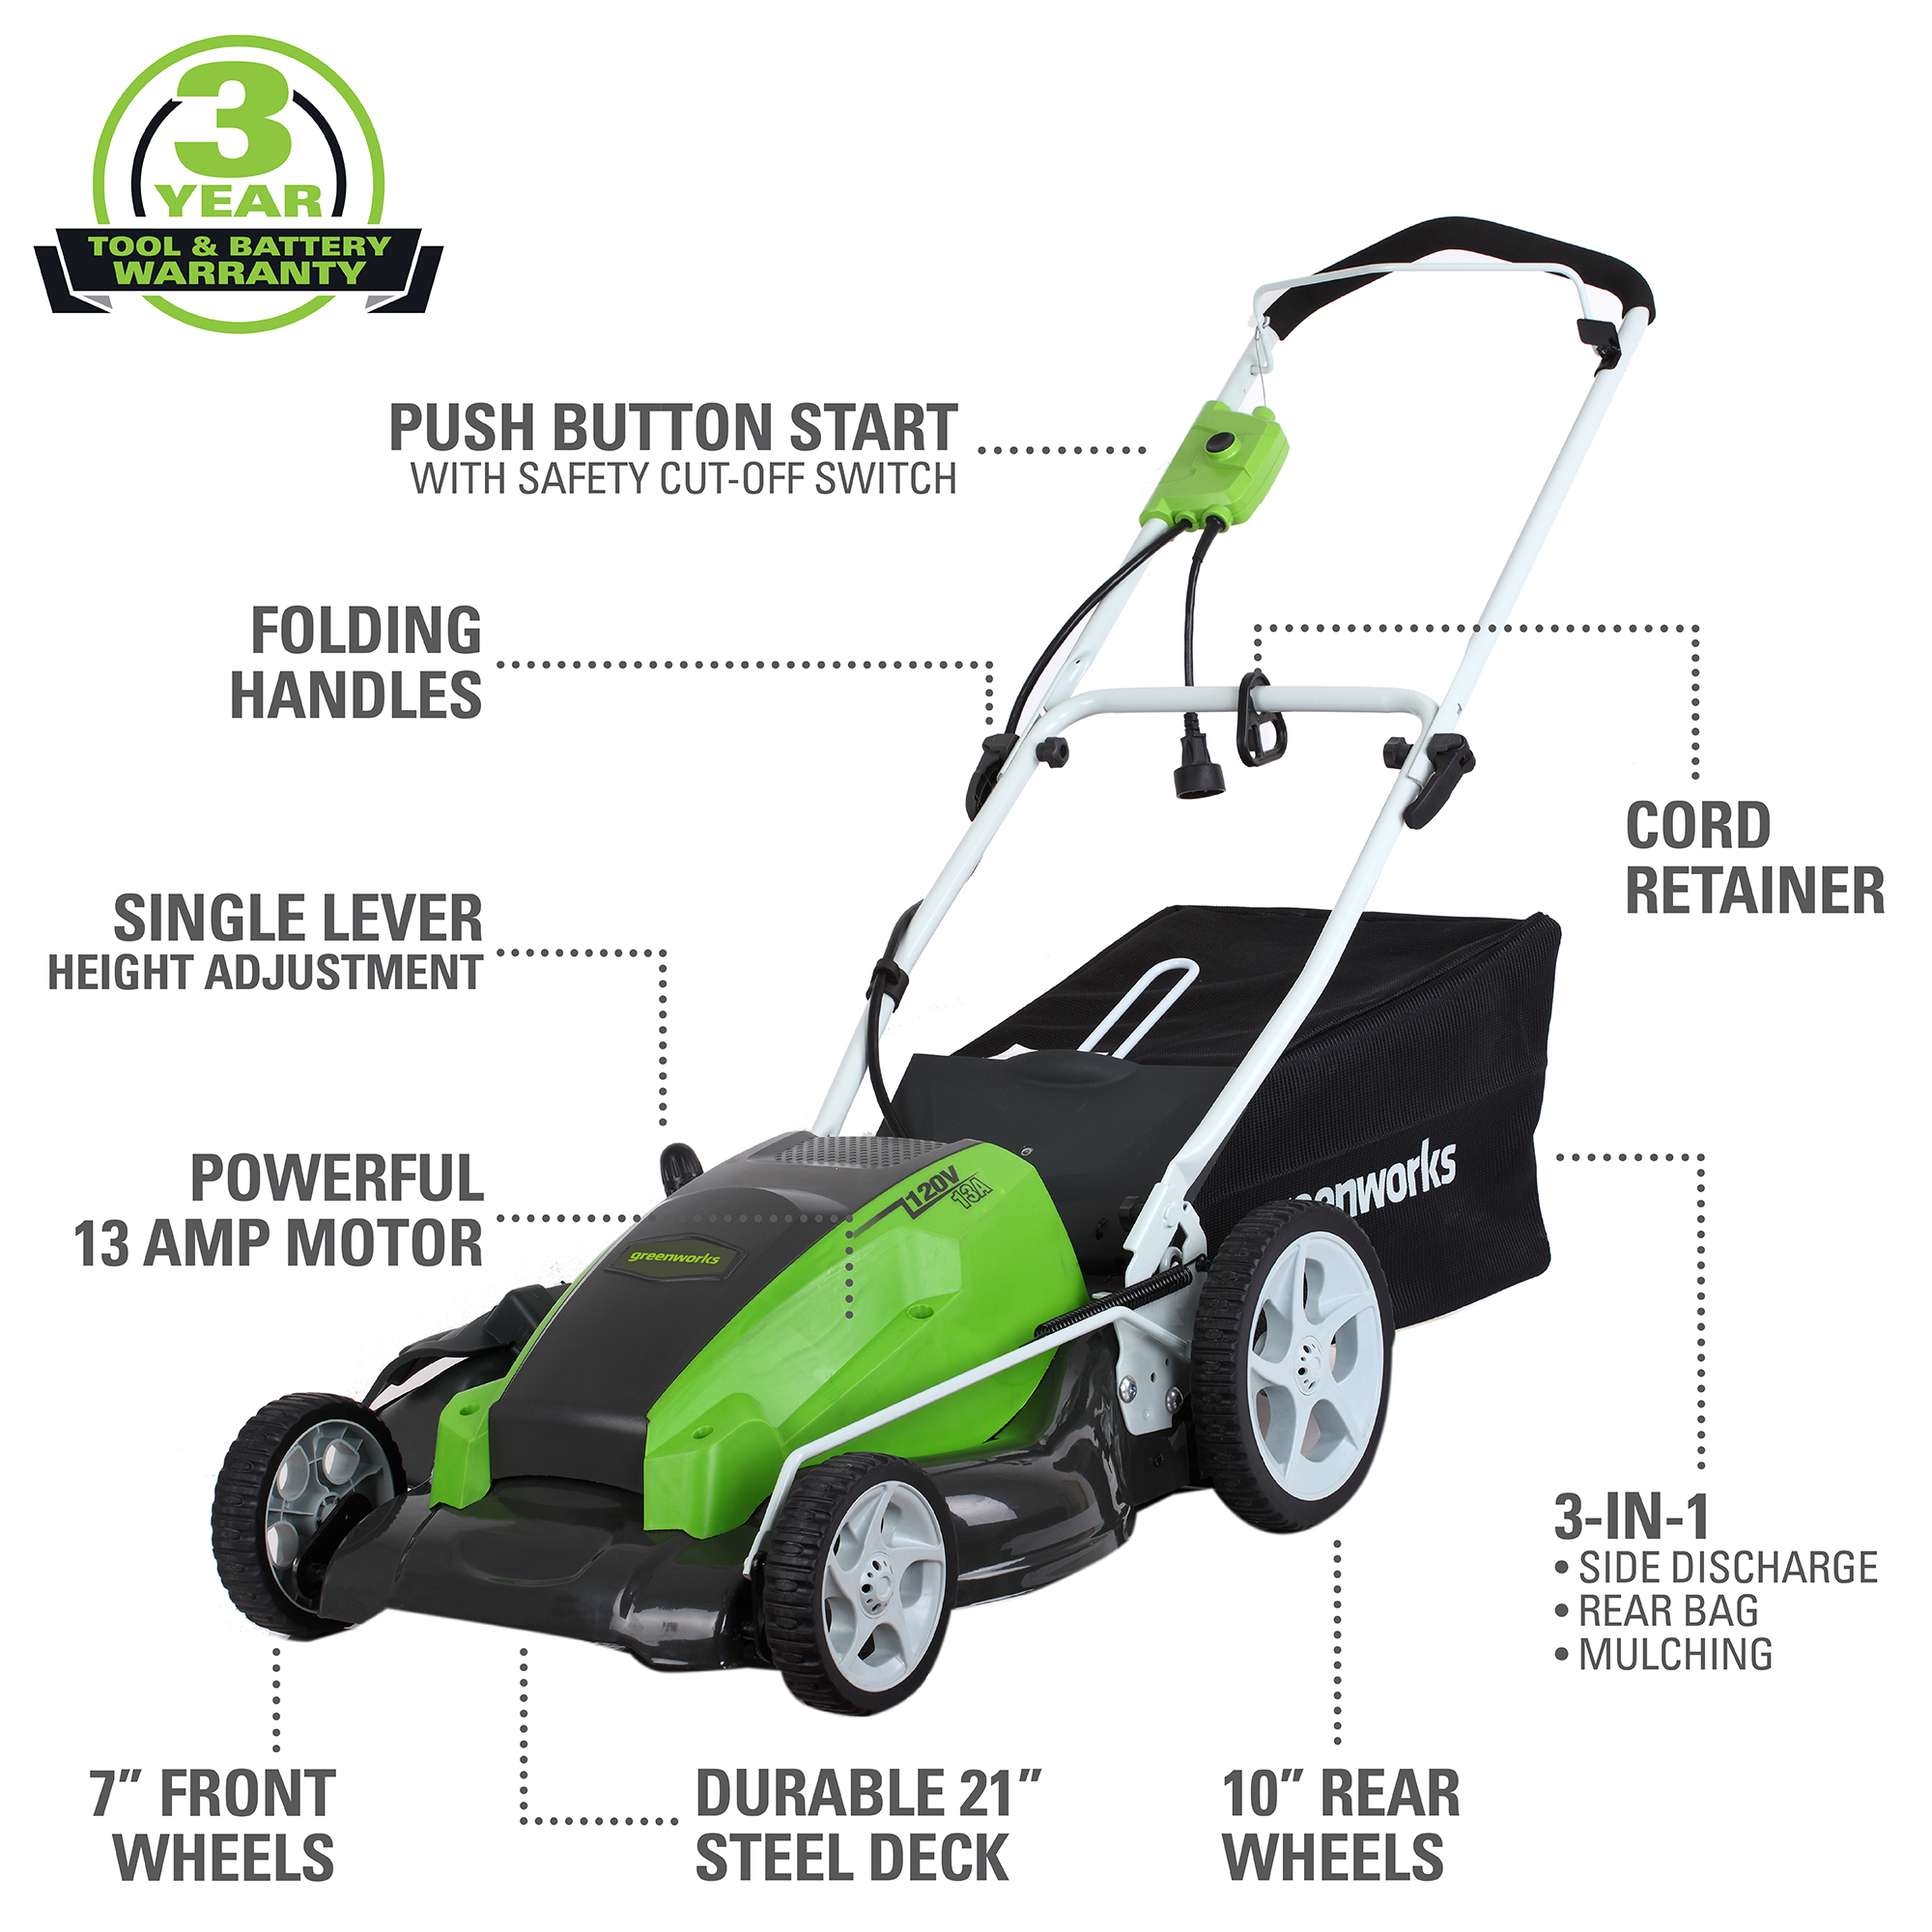 Greenworks 13 Amp 21" Corded Electric Walk-Behind Push Lawn Mower 25112 - image 2 of 12